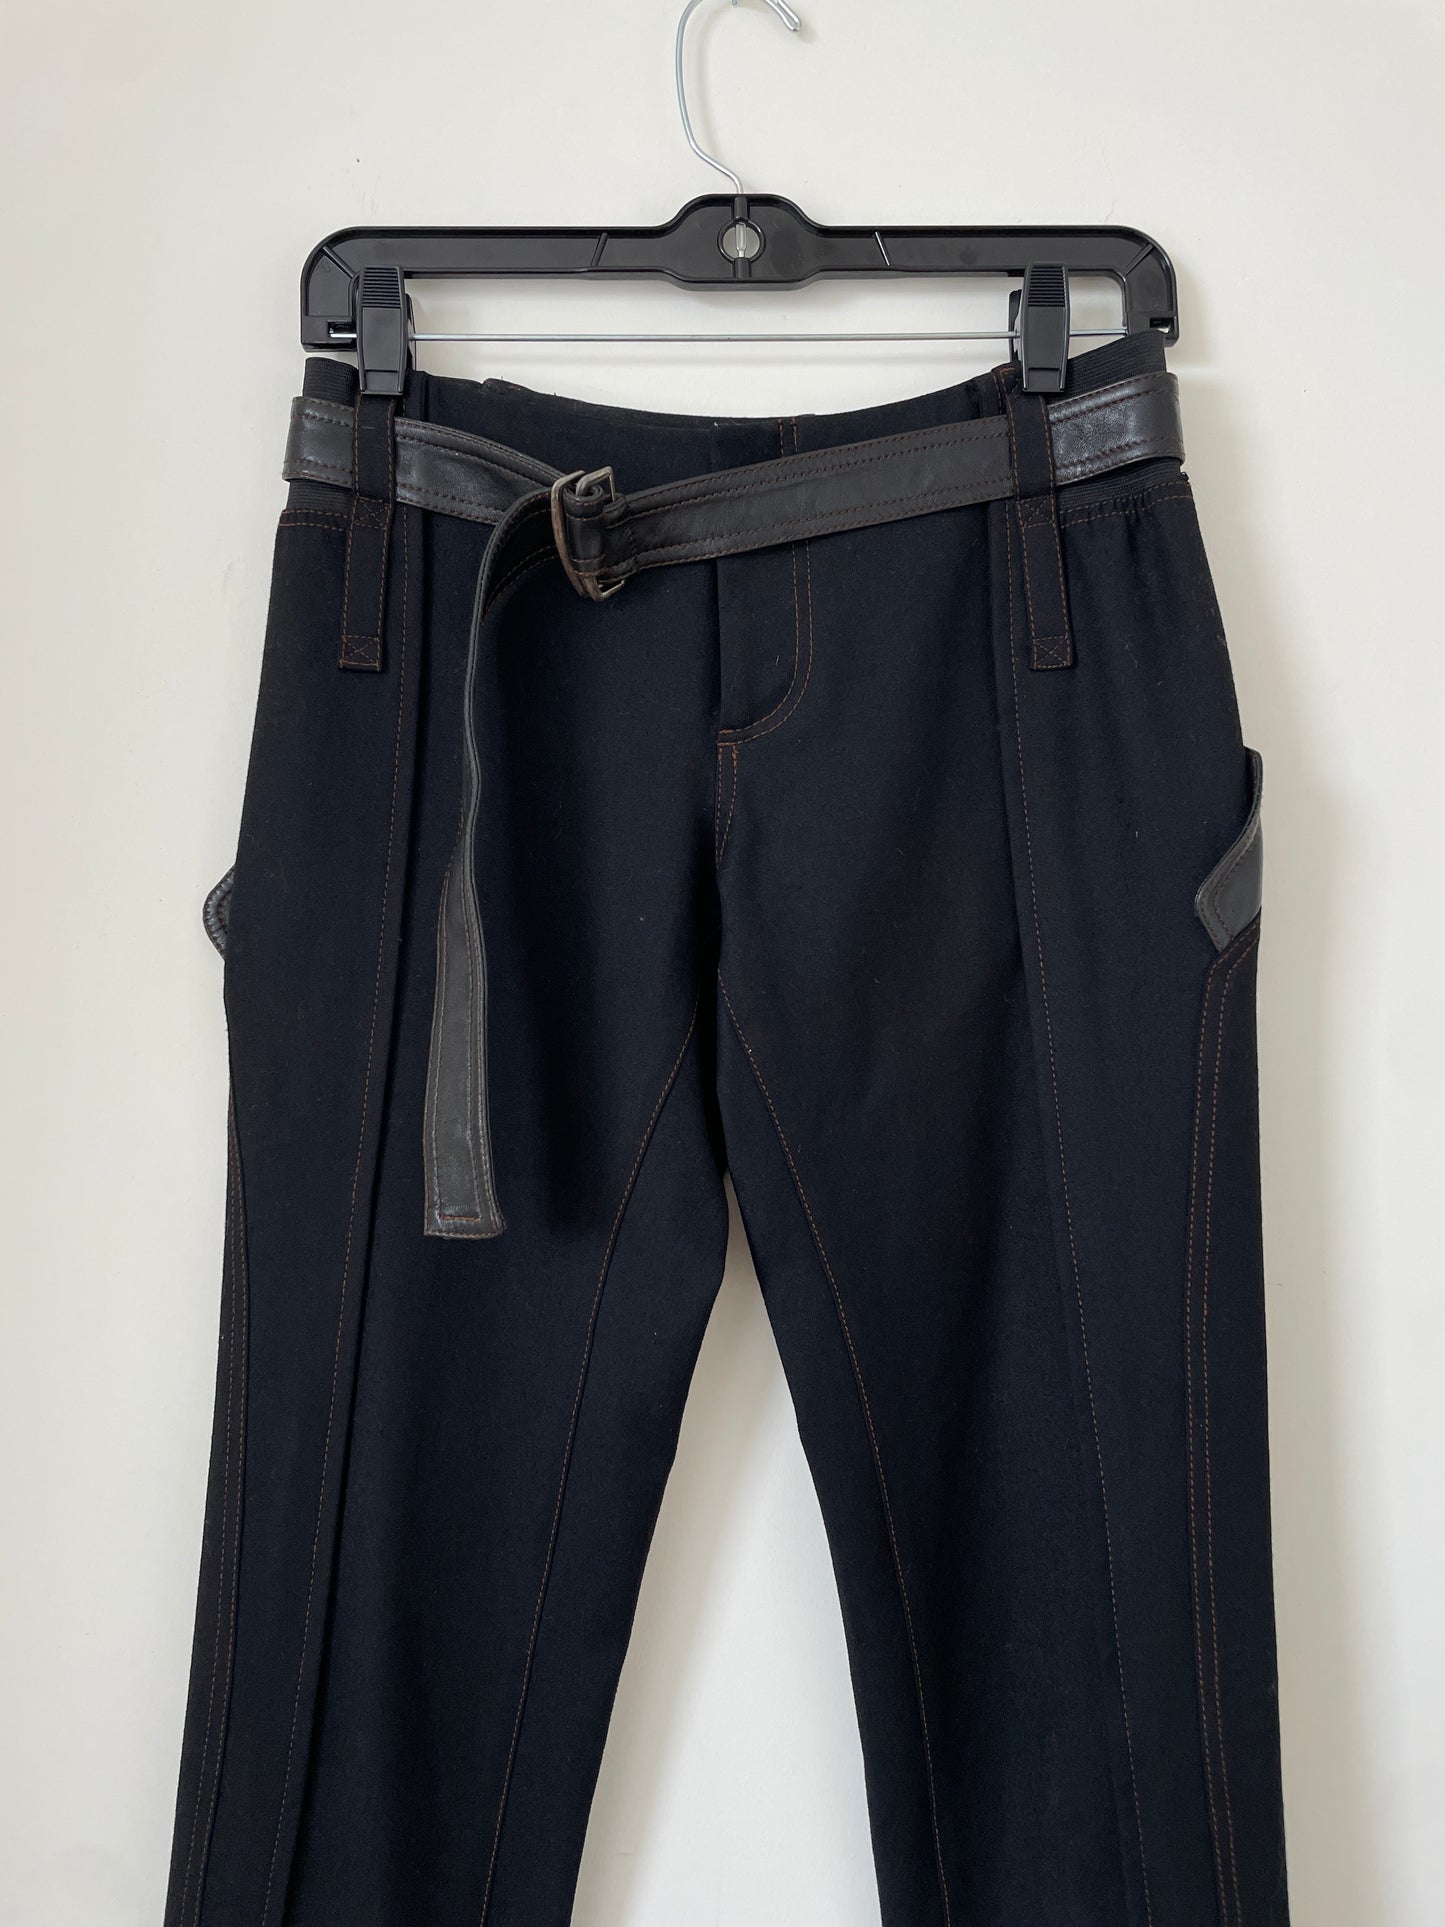 Sharon Wauchob 2000's stretch black low waisted pants with leather pockets and belt